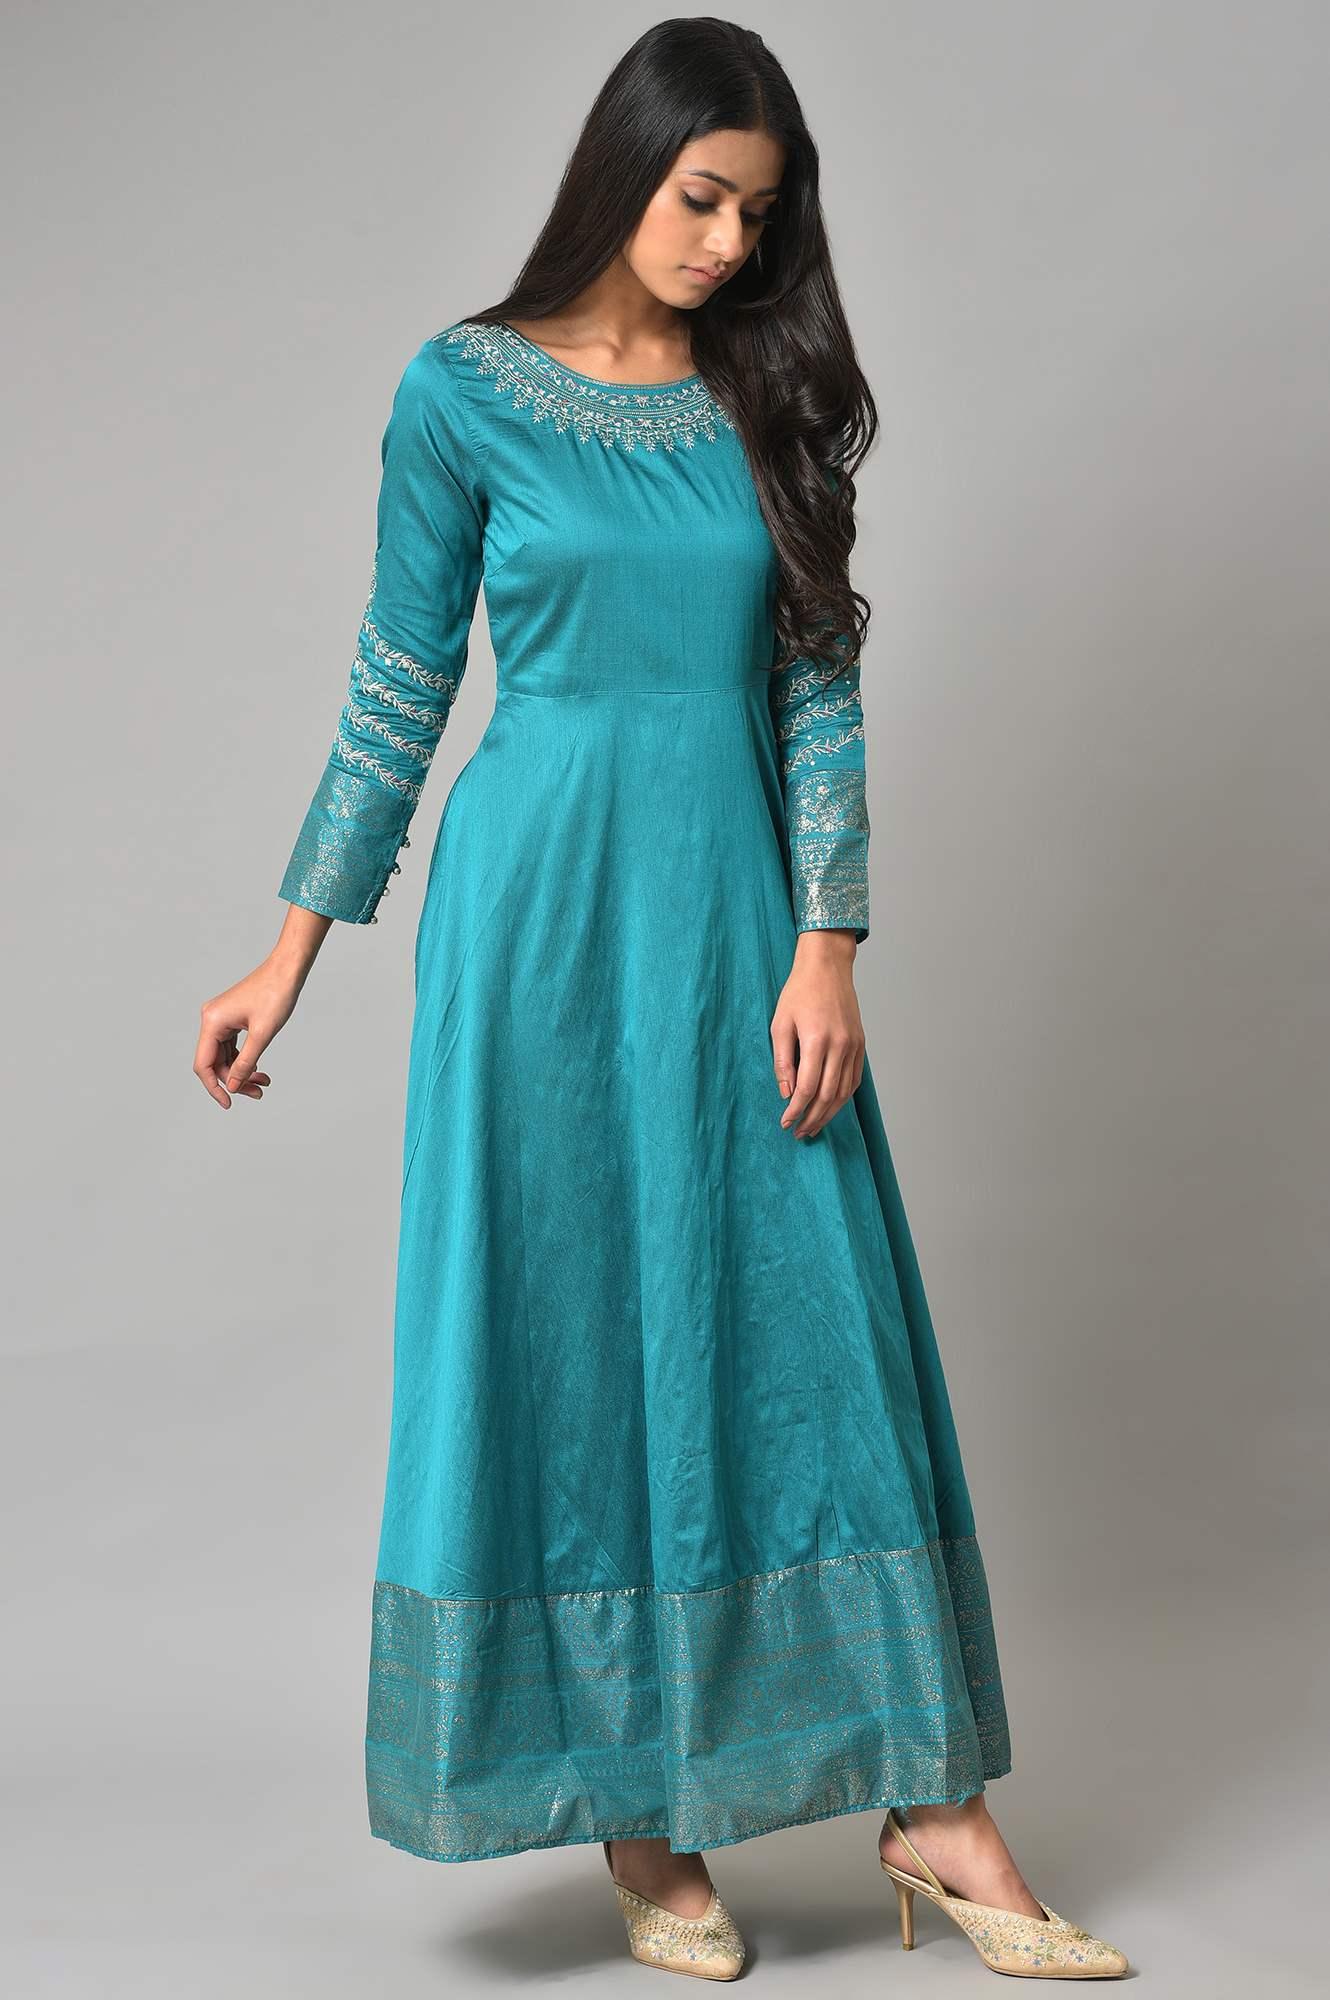 Teal Blue Glitter Printed And Embroidered Dress - wforwoman